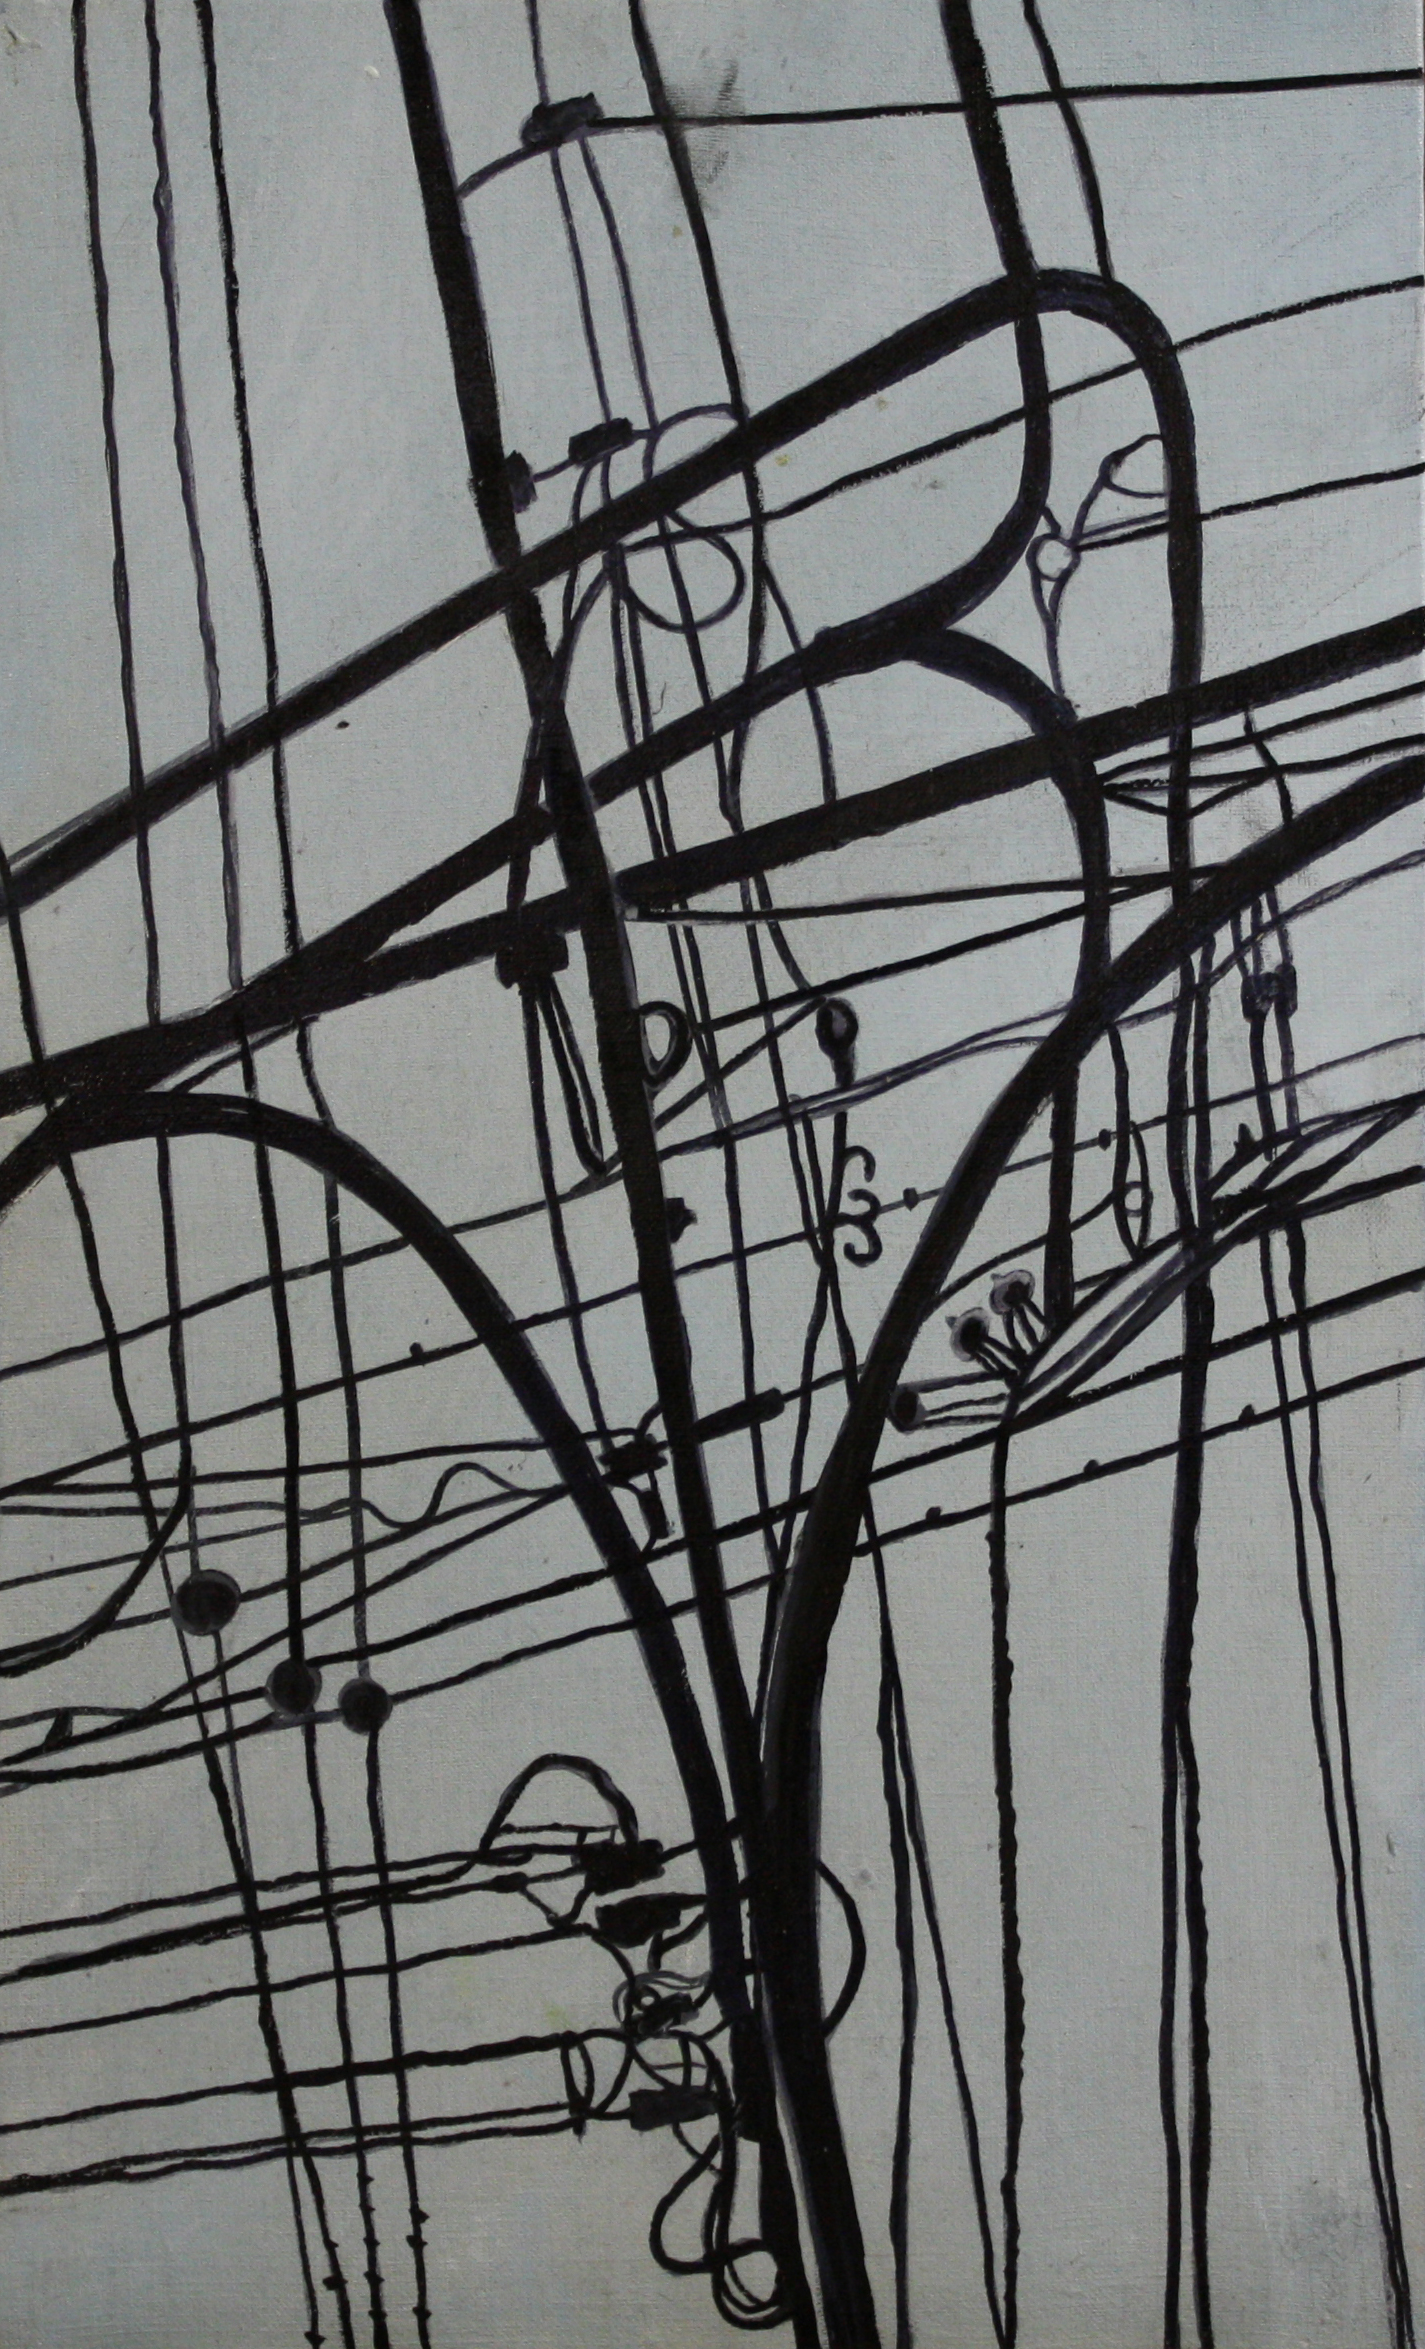  Wires:  Tangle   2011, oil on canvas on hardboard  50 x 76 cm  private collection     